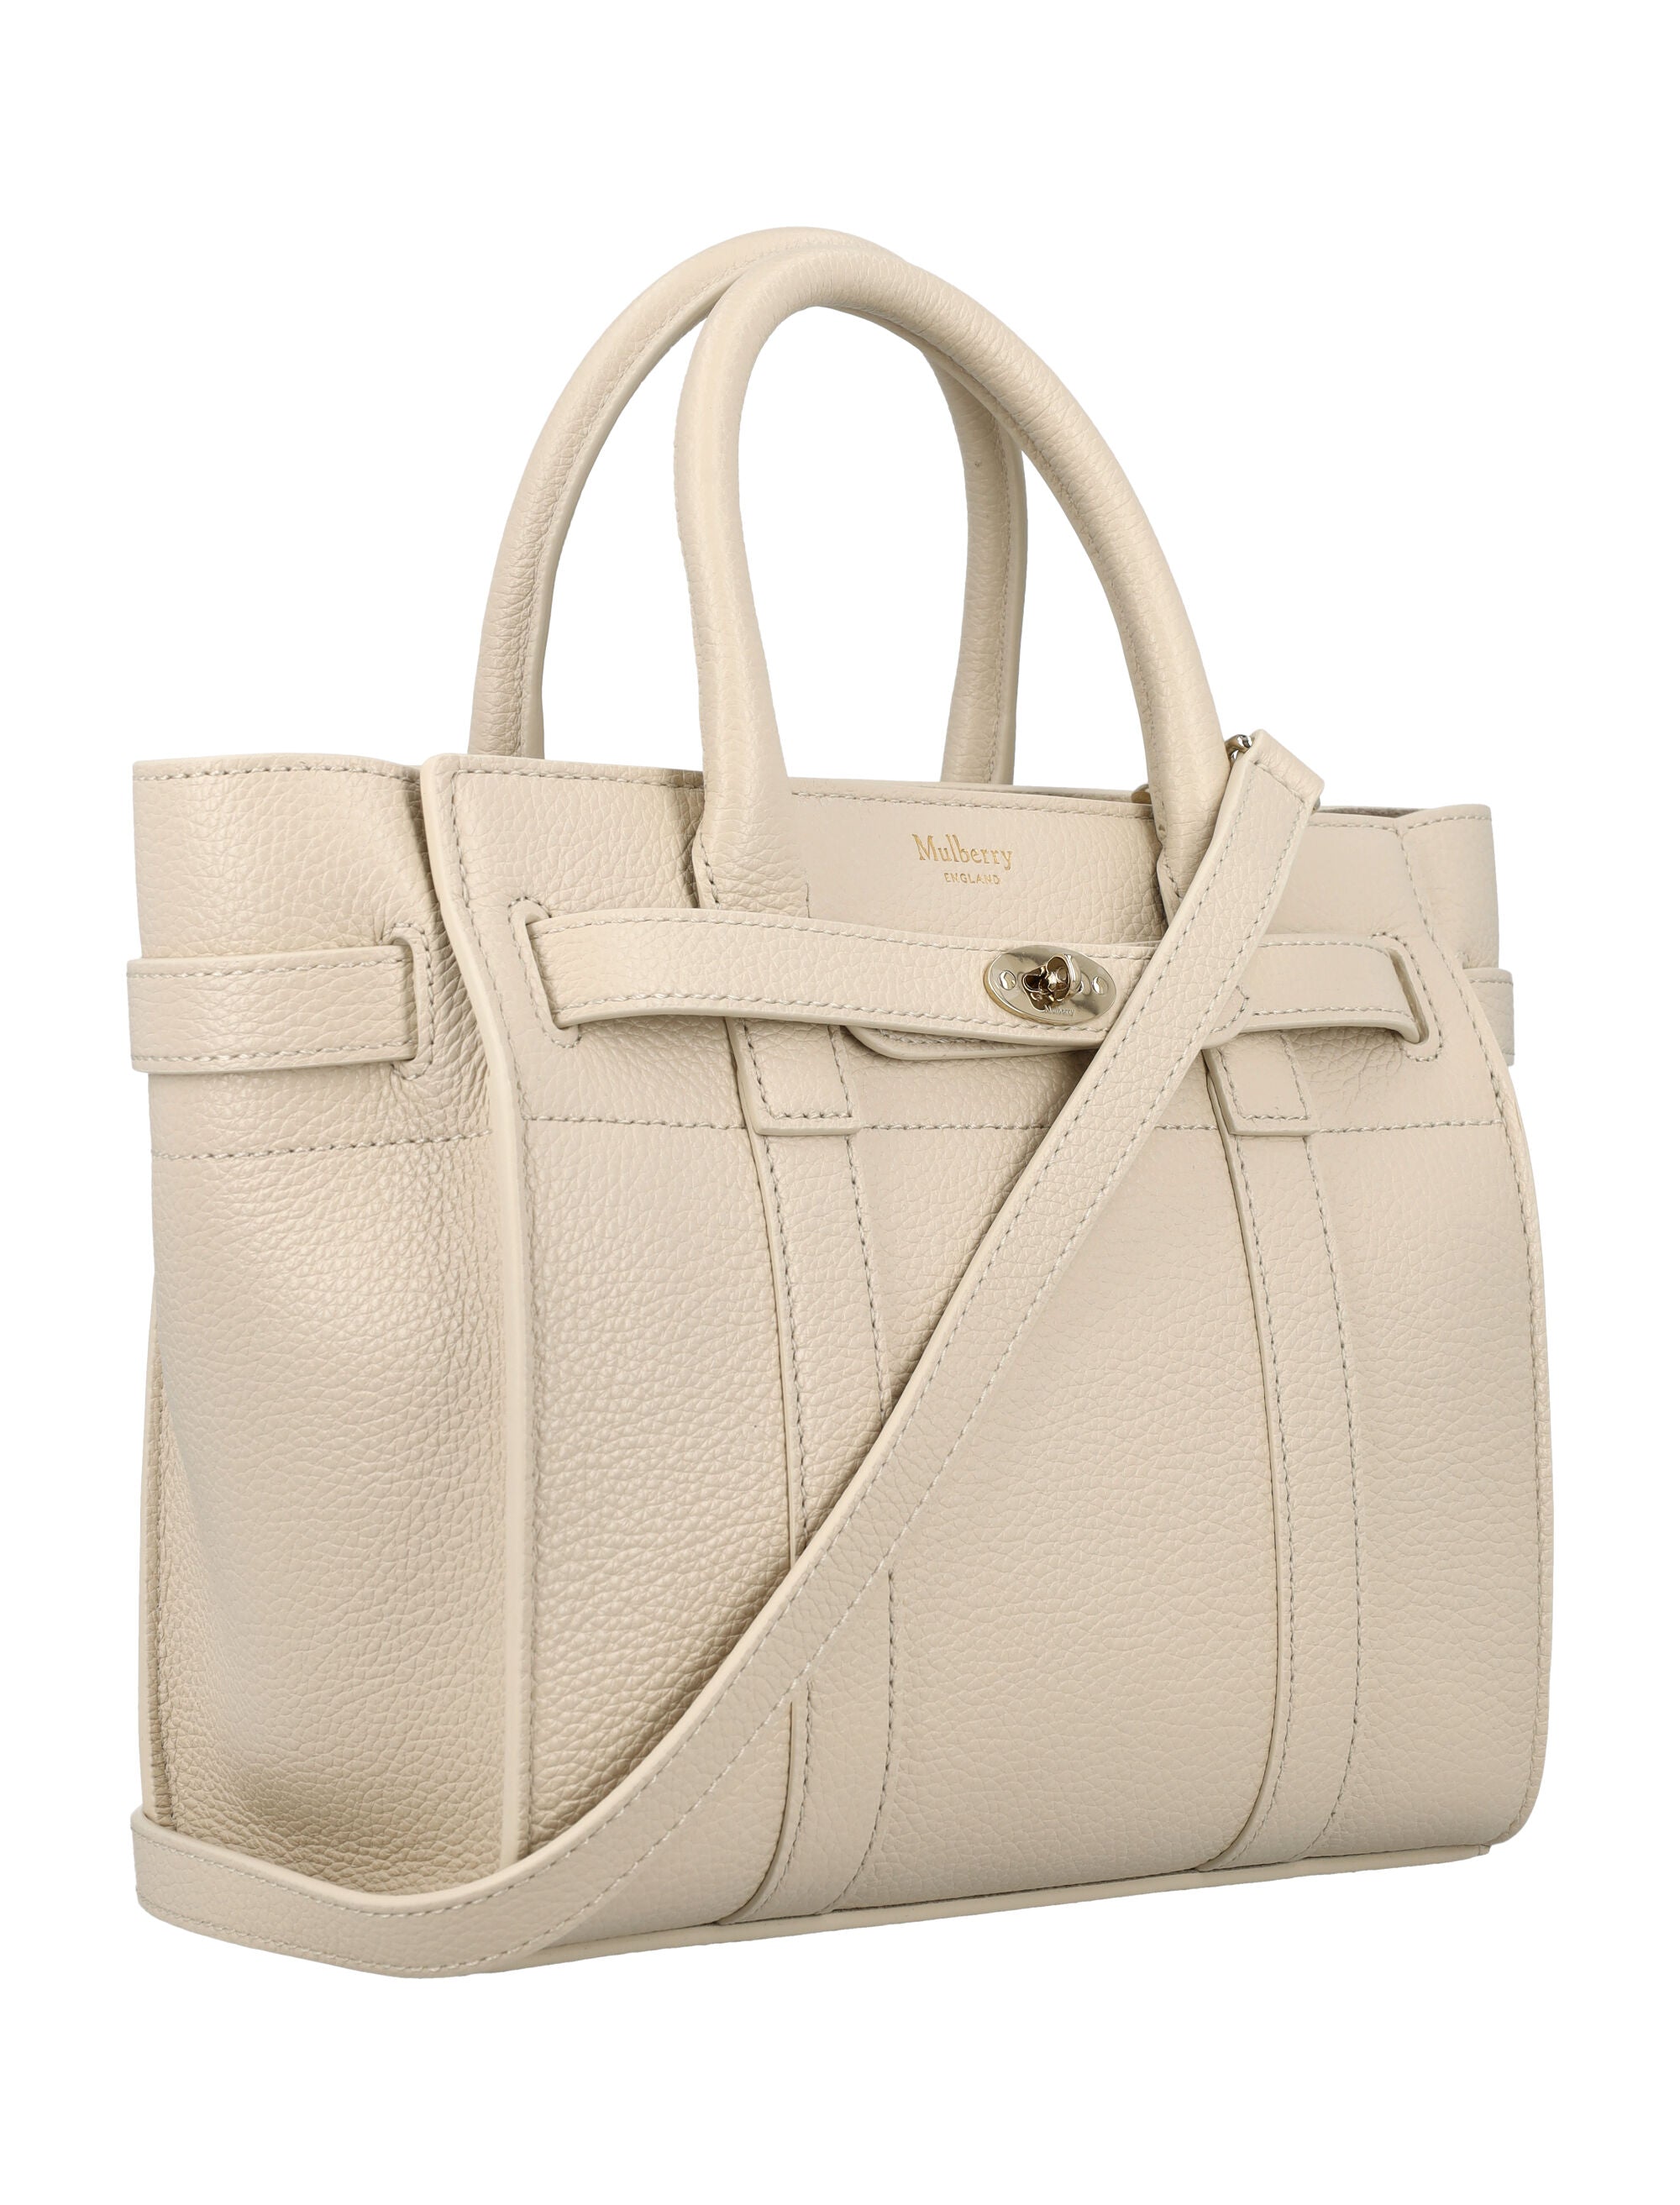 Shop Mulberry Black Leather Mini Zipped Bayswater Handbag For Women In White